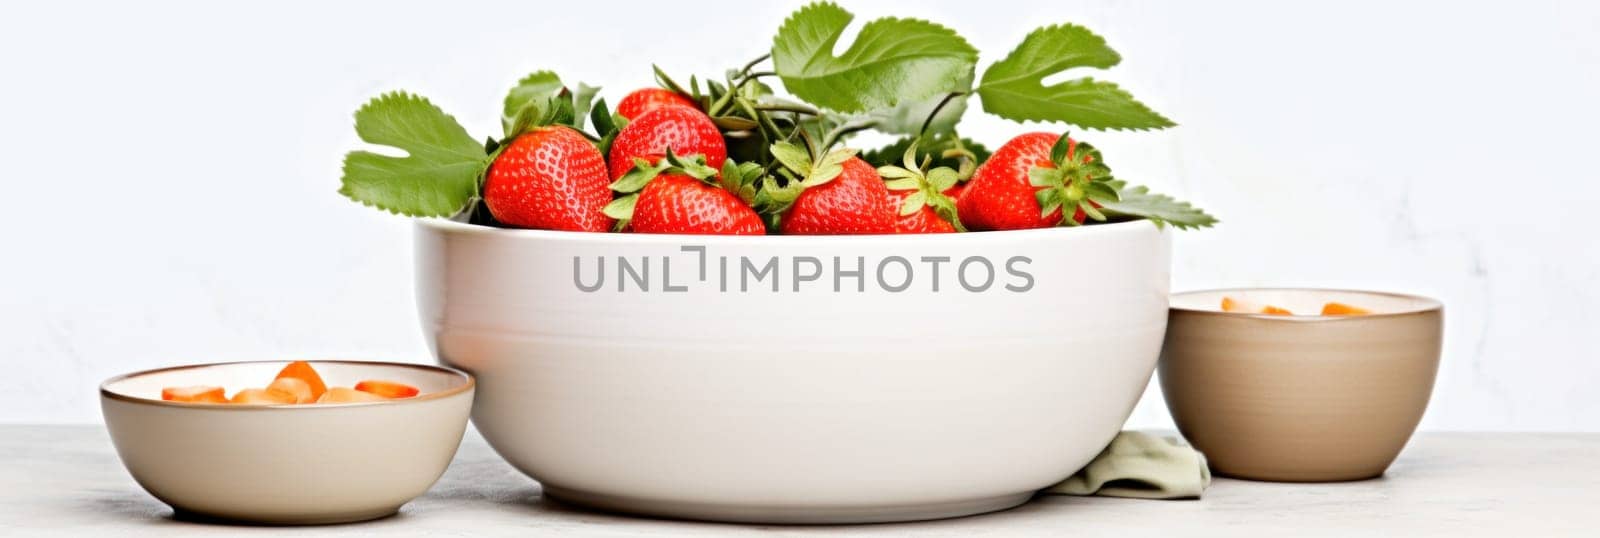 A bowl of strawberries and two cups of coffee